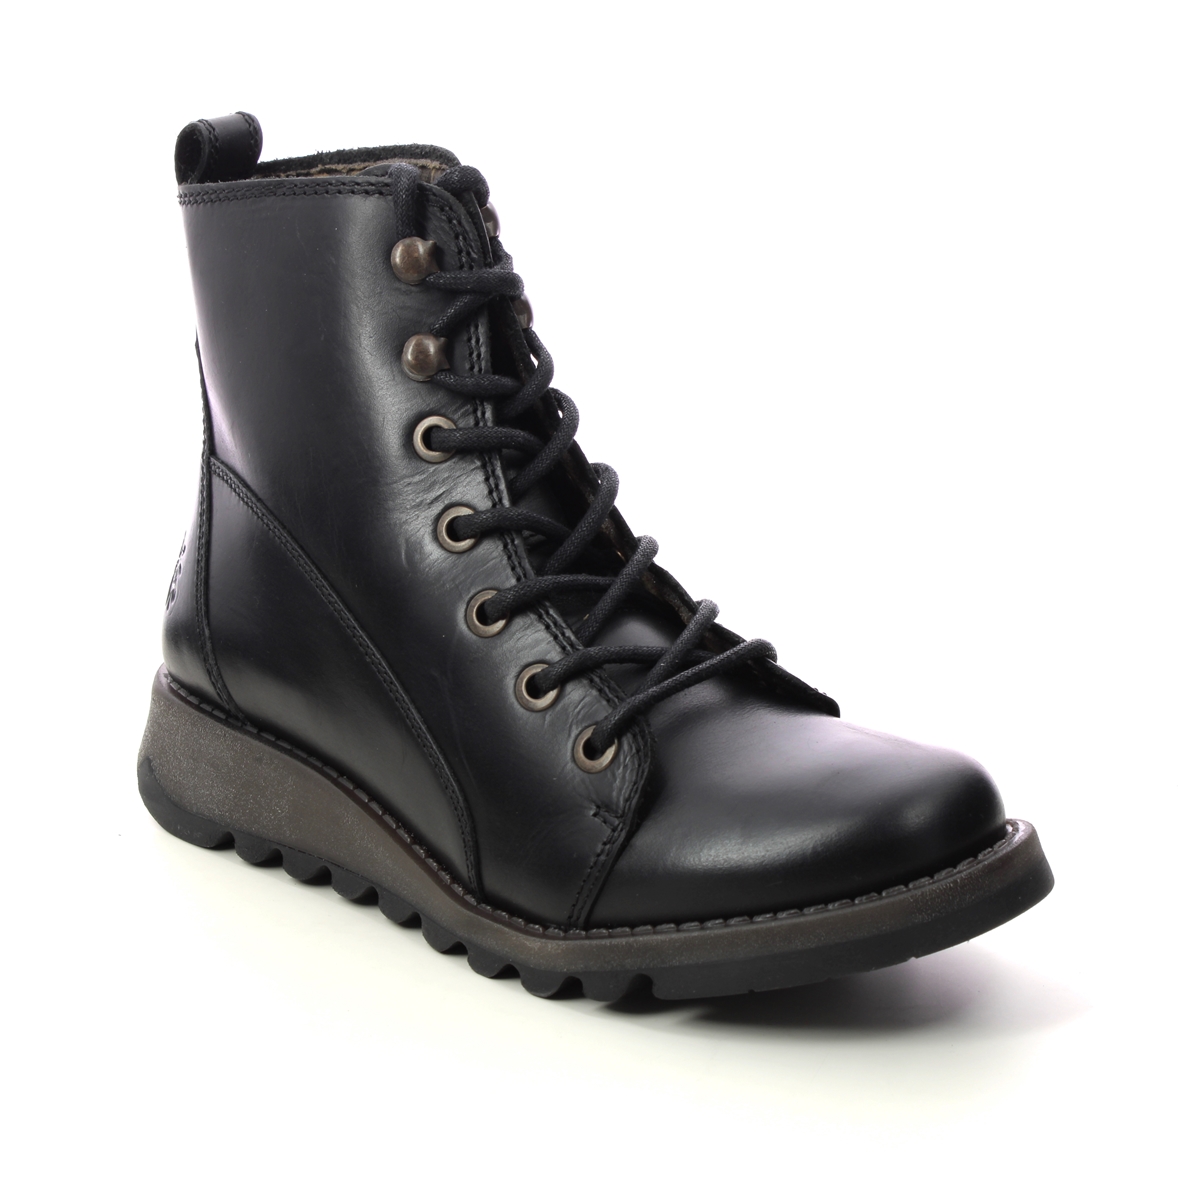 Fly London Sore  Sminx Black leather Womens Lace Up Boots P144813-000 in a Plain Leather in Size 37